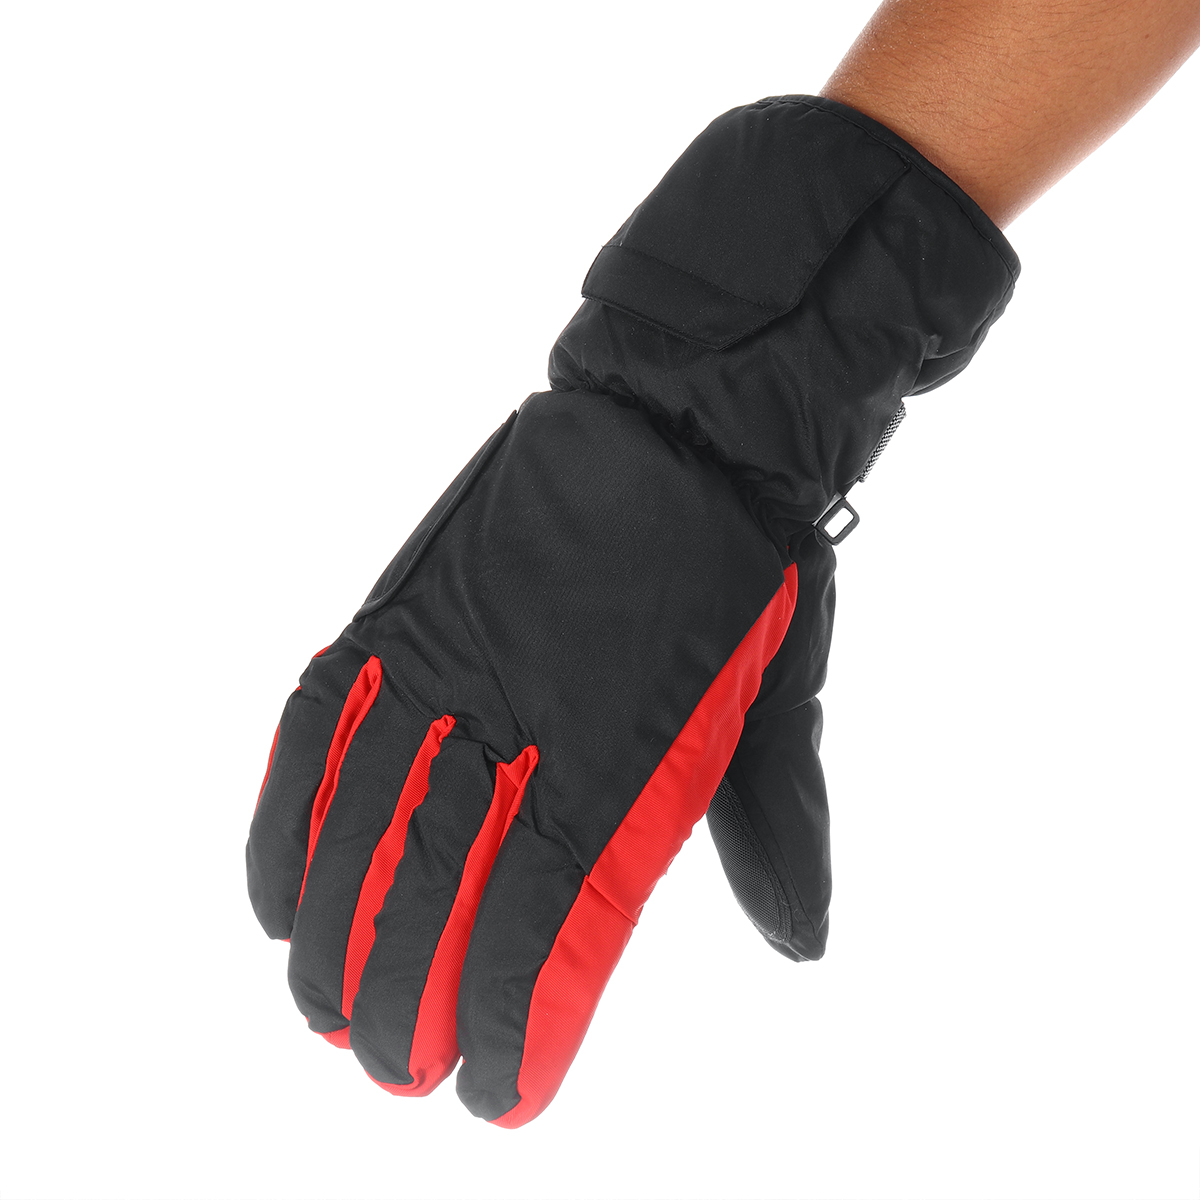 45V-Smart-Electric-Heated-Gloves-Winter-Ski-Cycling-Keep-Warm-Battery-Powered-Heating-Gloves-5-Finge-1771505-9